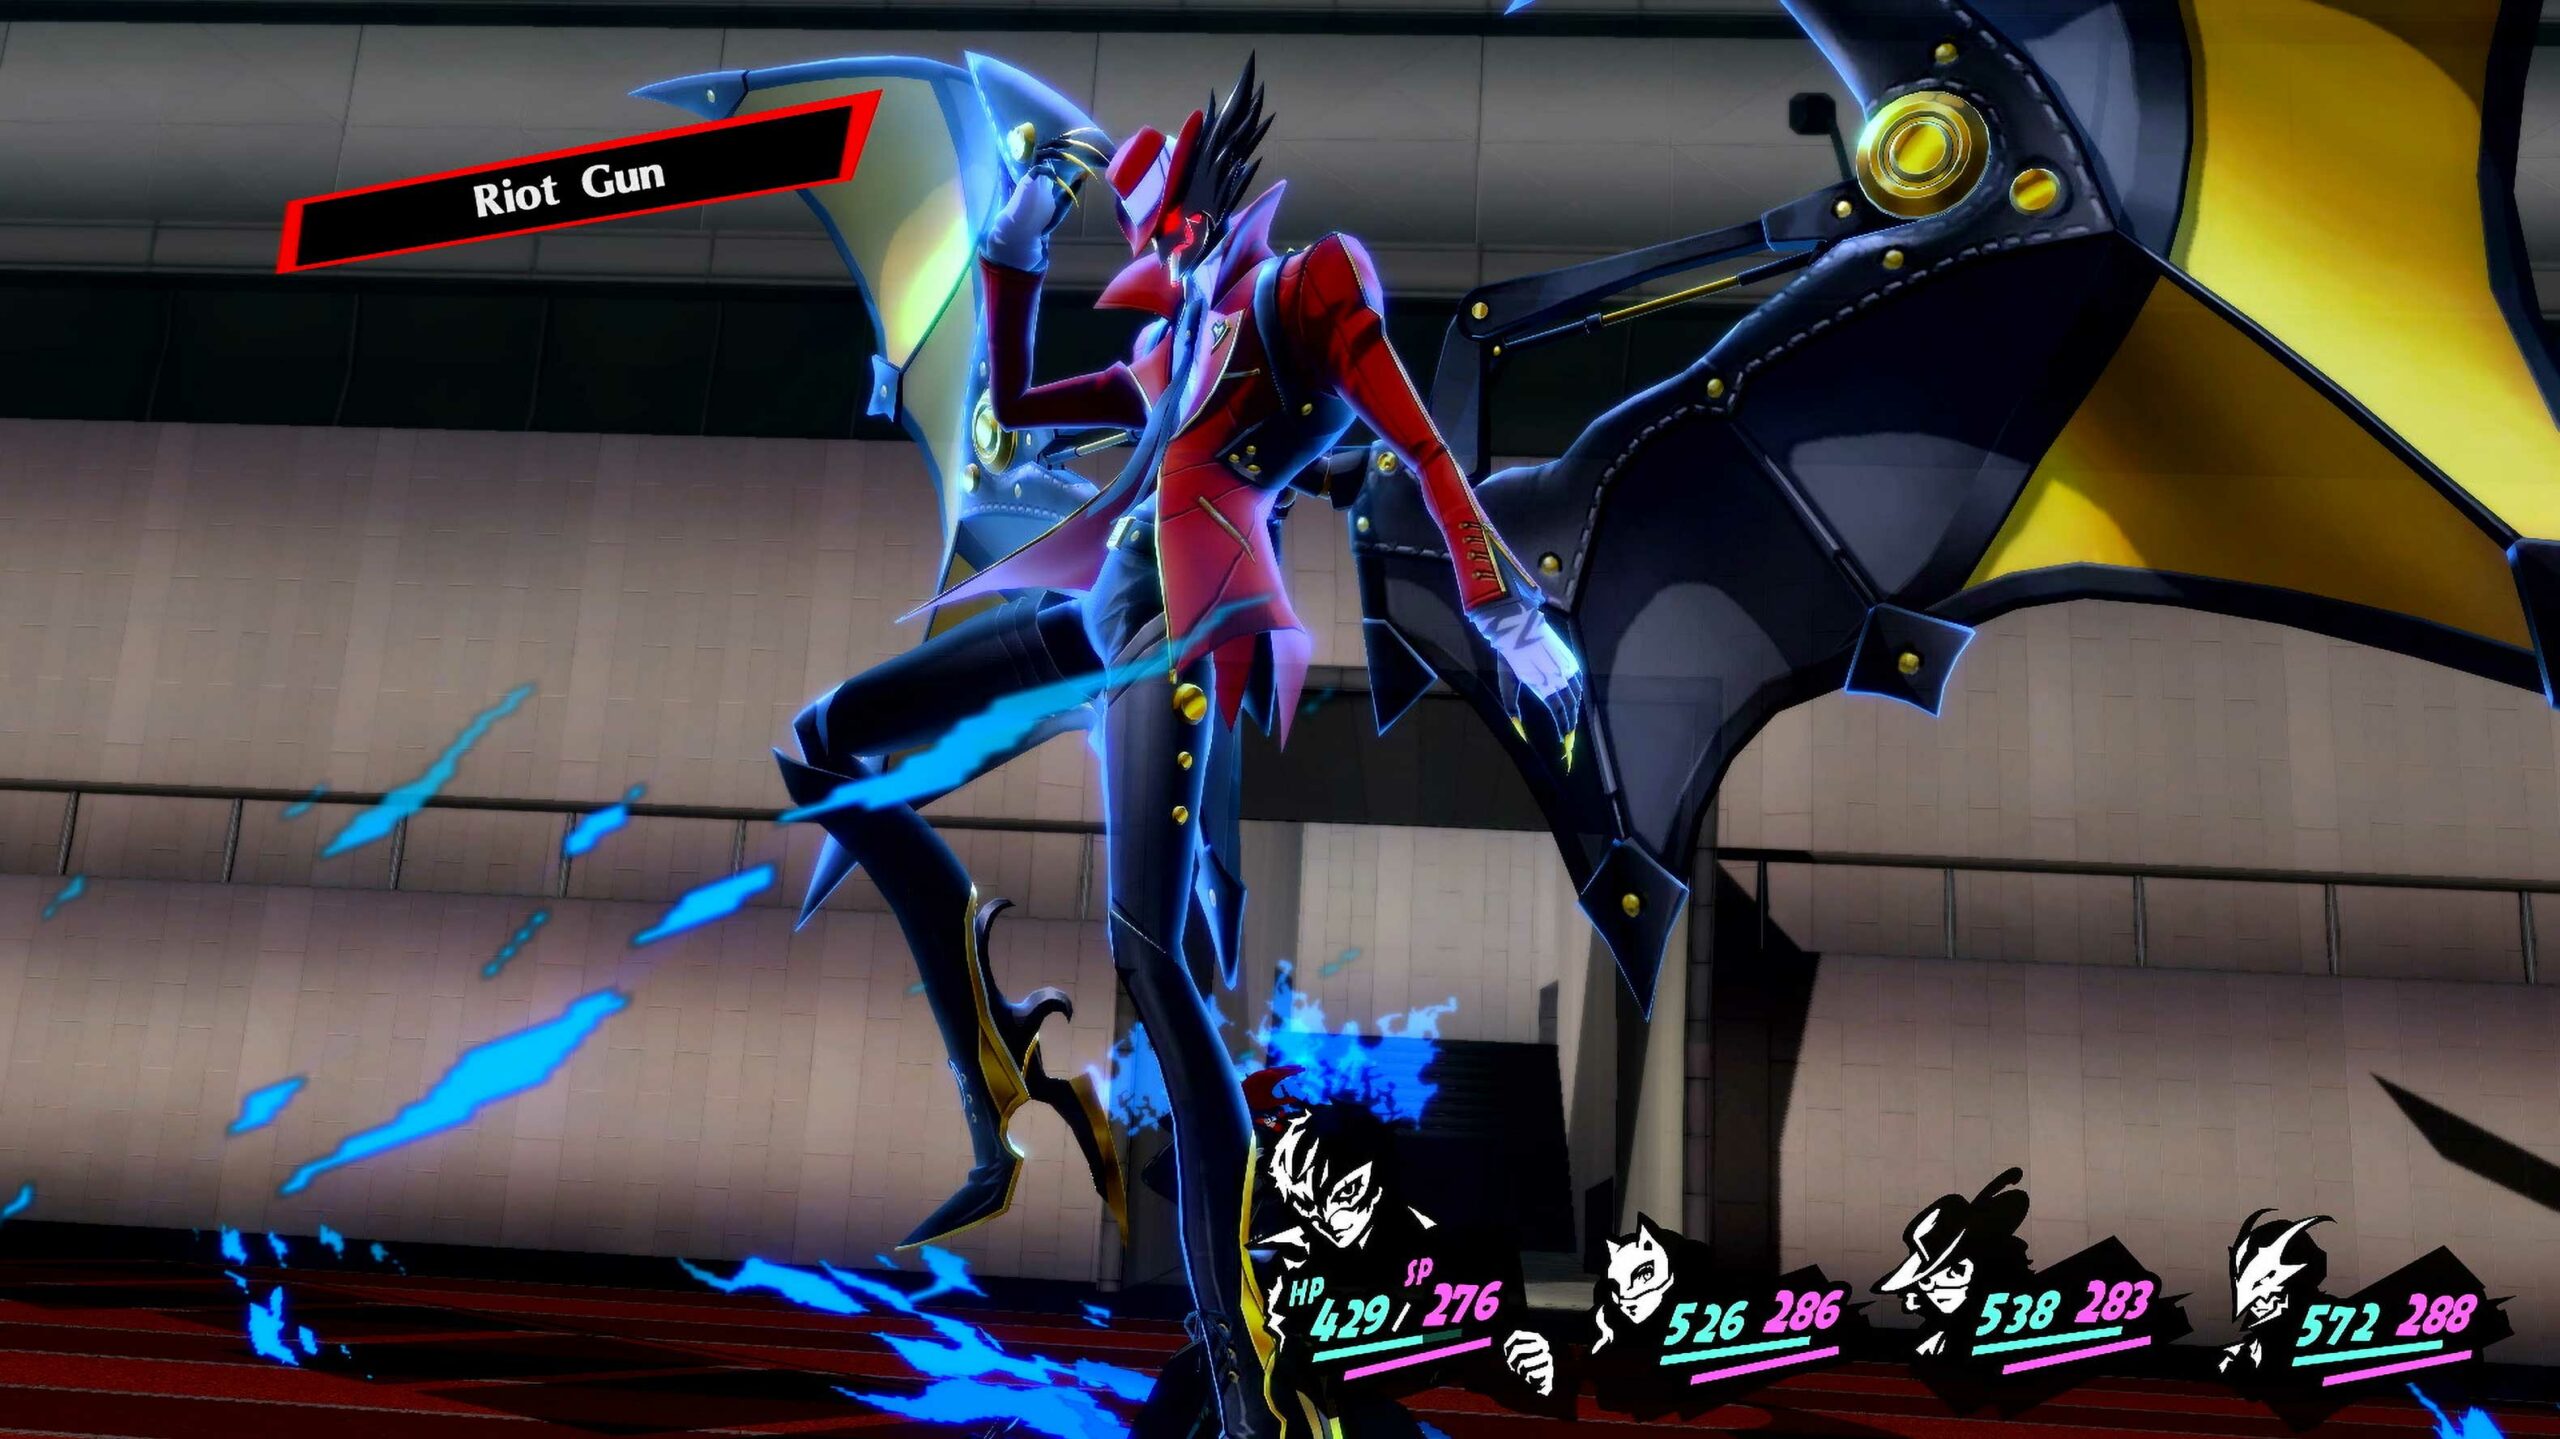 Joker summons Arsène in Persona 5 Royal on Xbox.